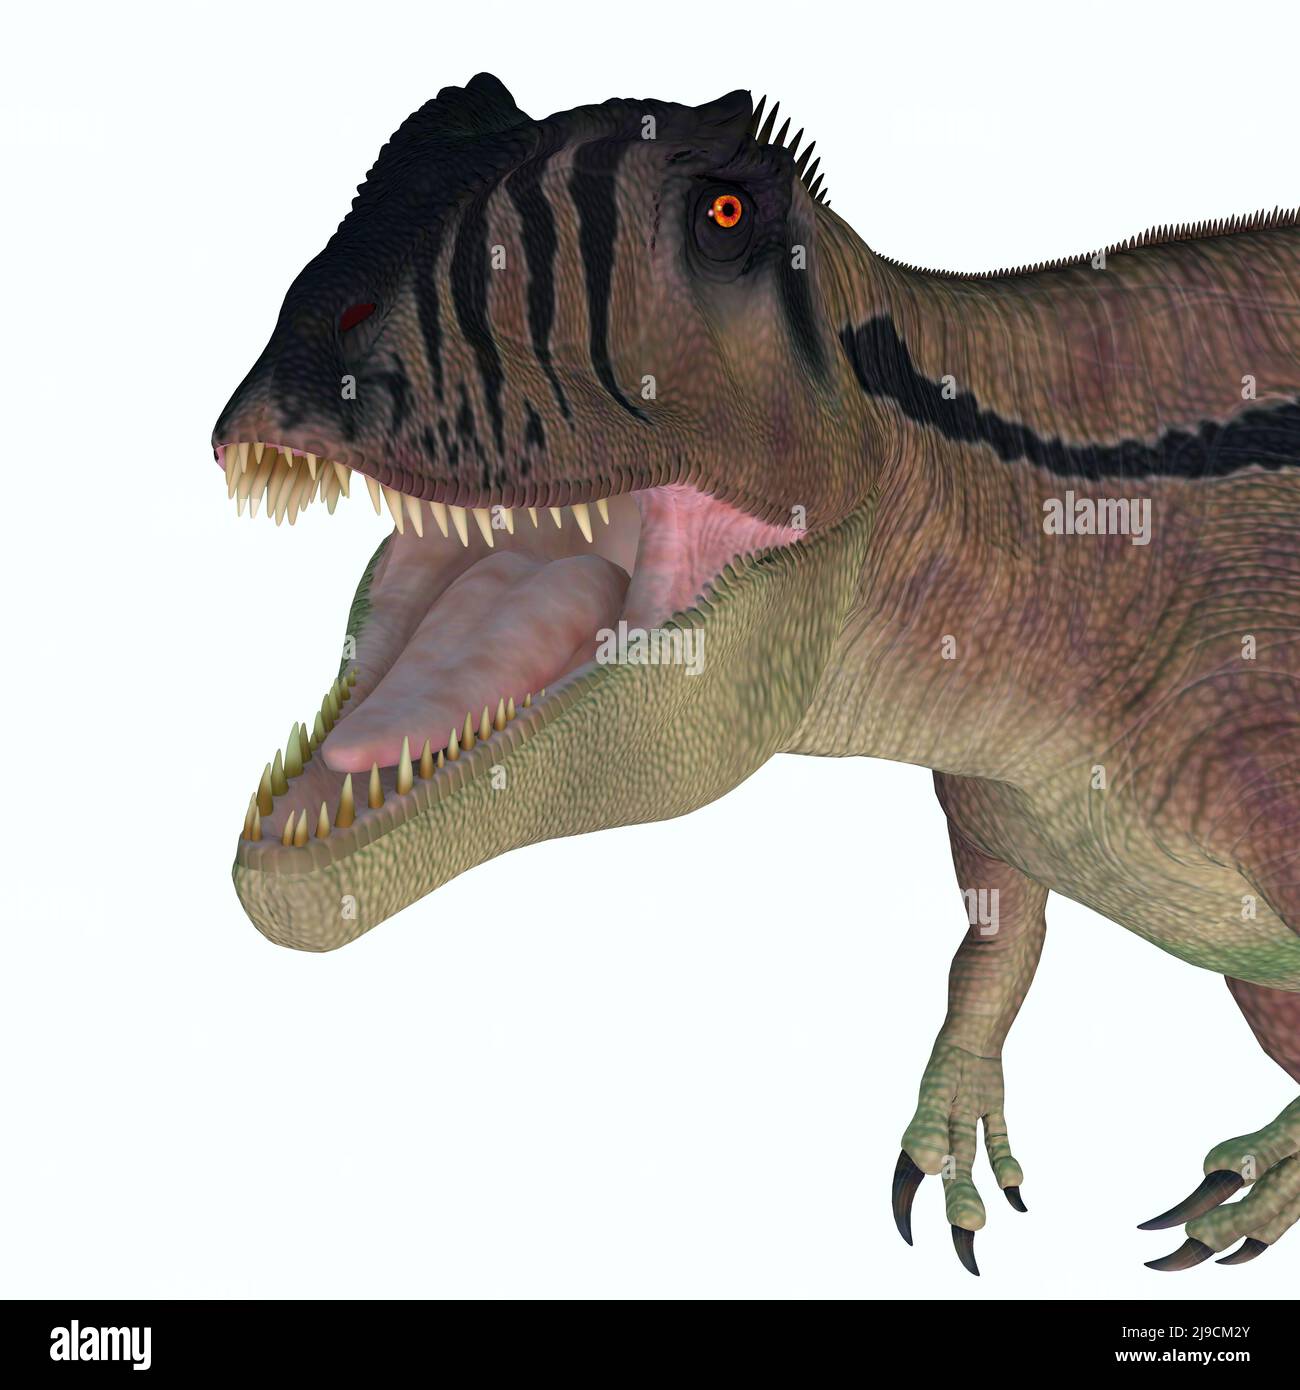 Carcharodontosaurus was a predatory theropod dinosaur in the Sahara, Africa during the Cretaceous Period. Stock Photo